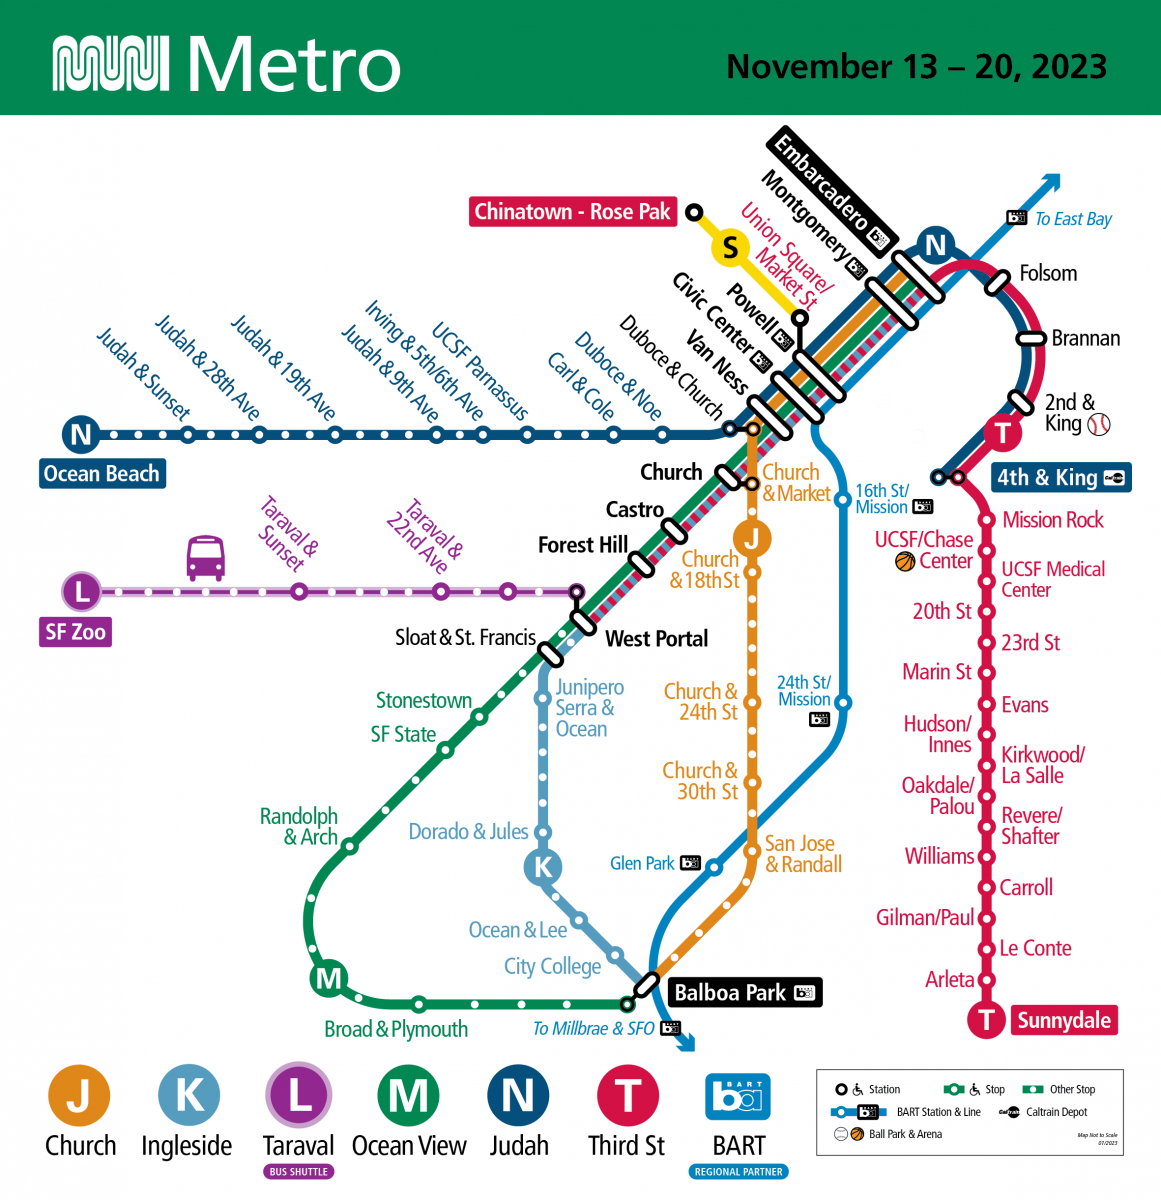 A colorful public transit map illustrating changes to SF Muni routes